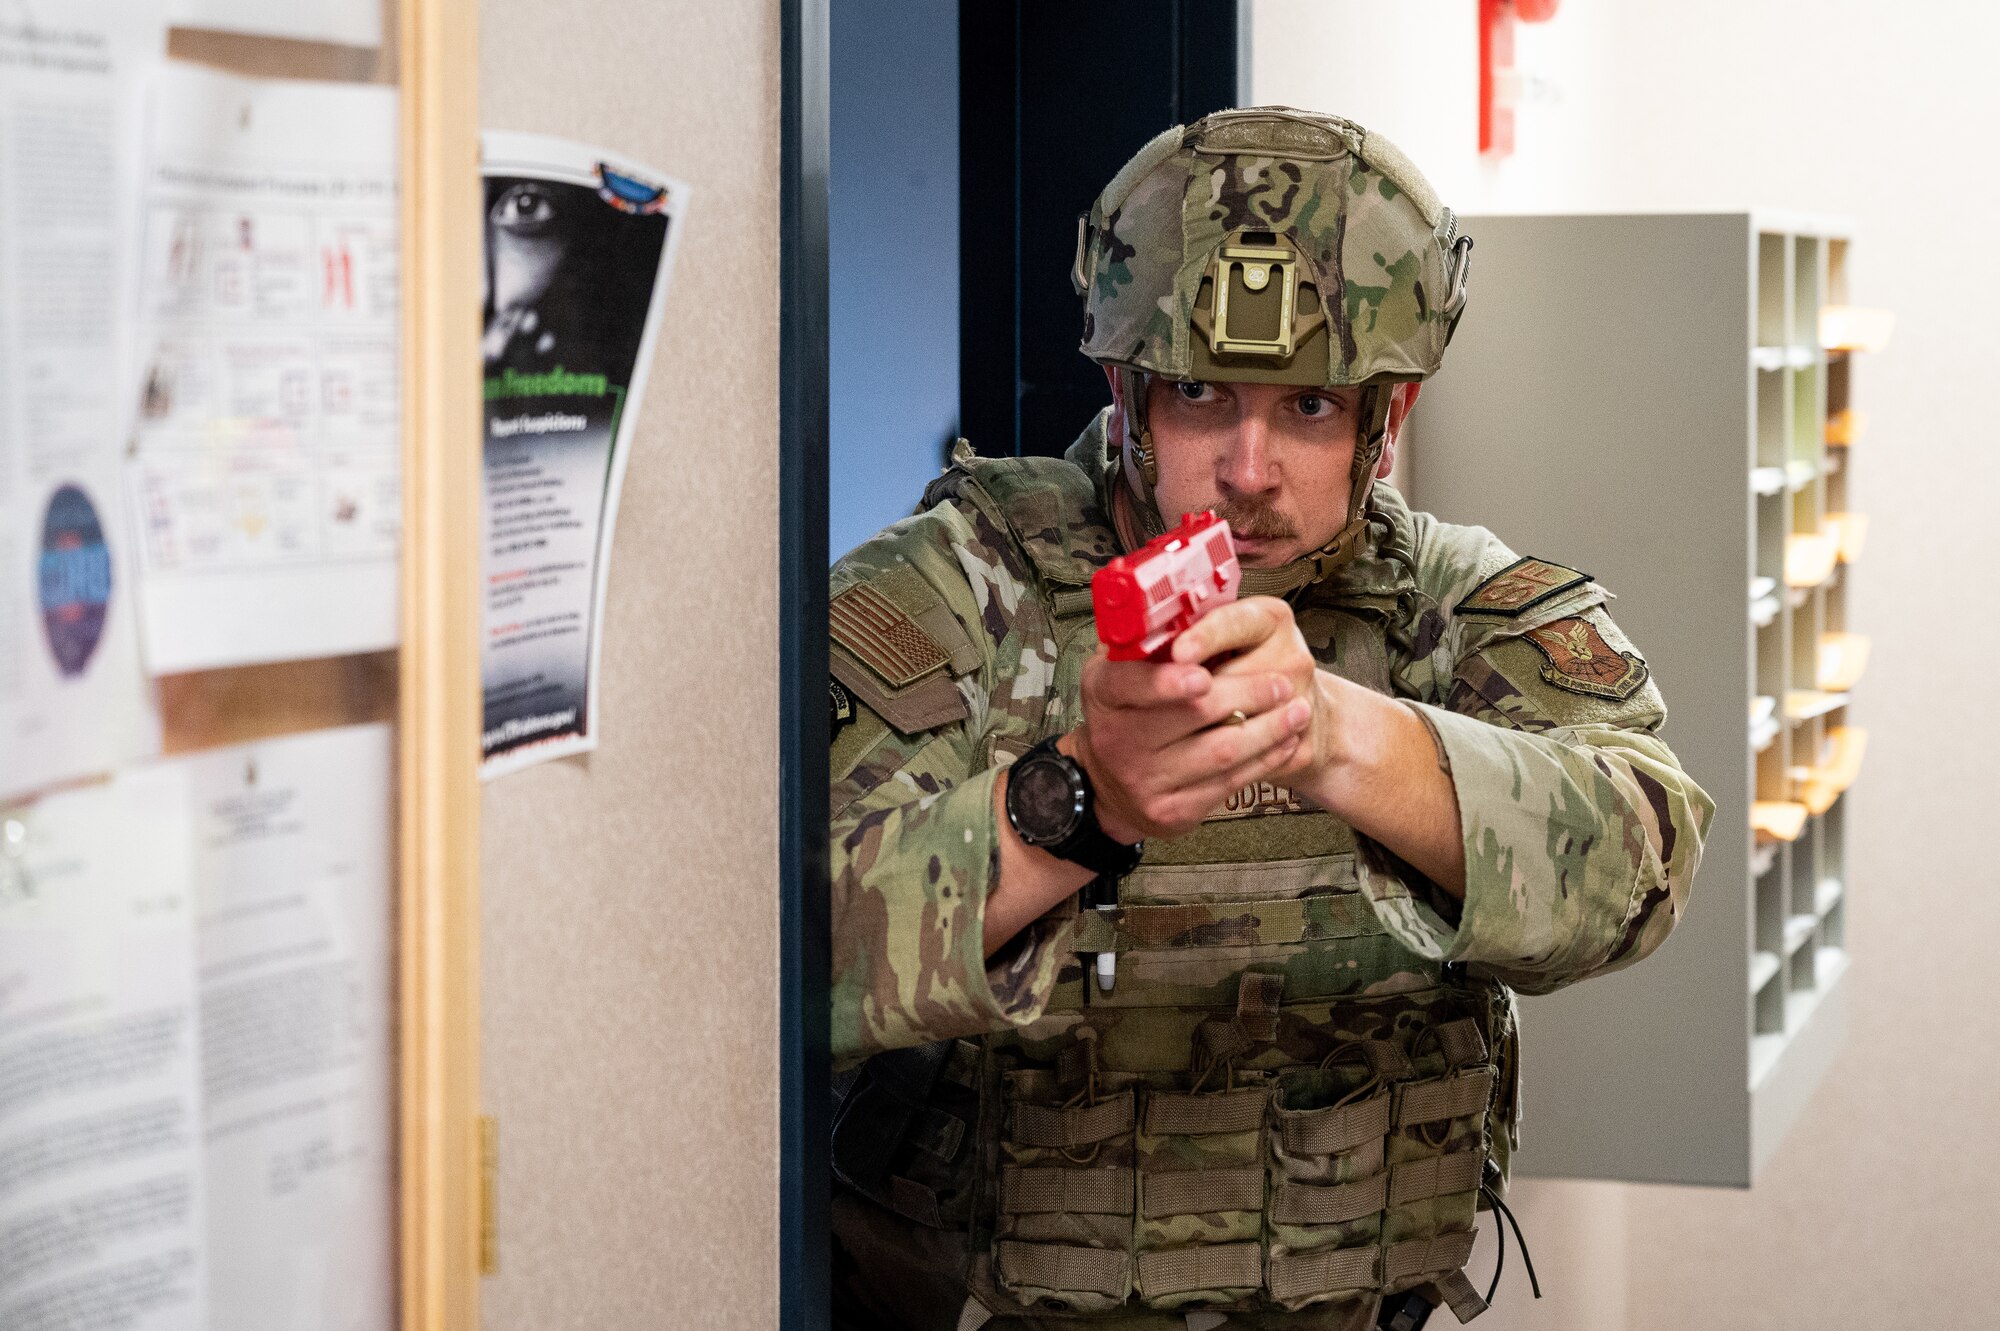 Tech. Sgt. Jacob Udell, 2nd Security Forces Squadron flight sergeant, stands guard at the entrance of a room during an active shooter exercise at Barksdale Air Force Base, Louisiana, Sept. 16, 2021. The 2nd SFS Airmen are the first to respond to an active shooter and they're tasked with neutralizing the threat and protecting base personnel. (U.S. Air Force photo by Airman 1st Class Jonathan E. Ramos)